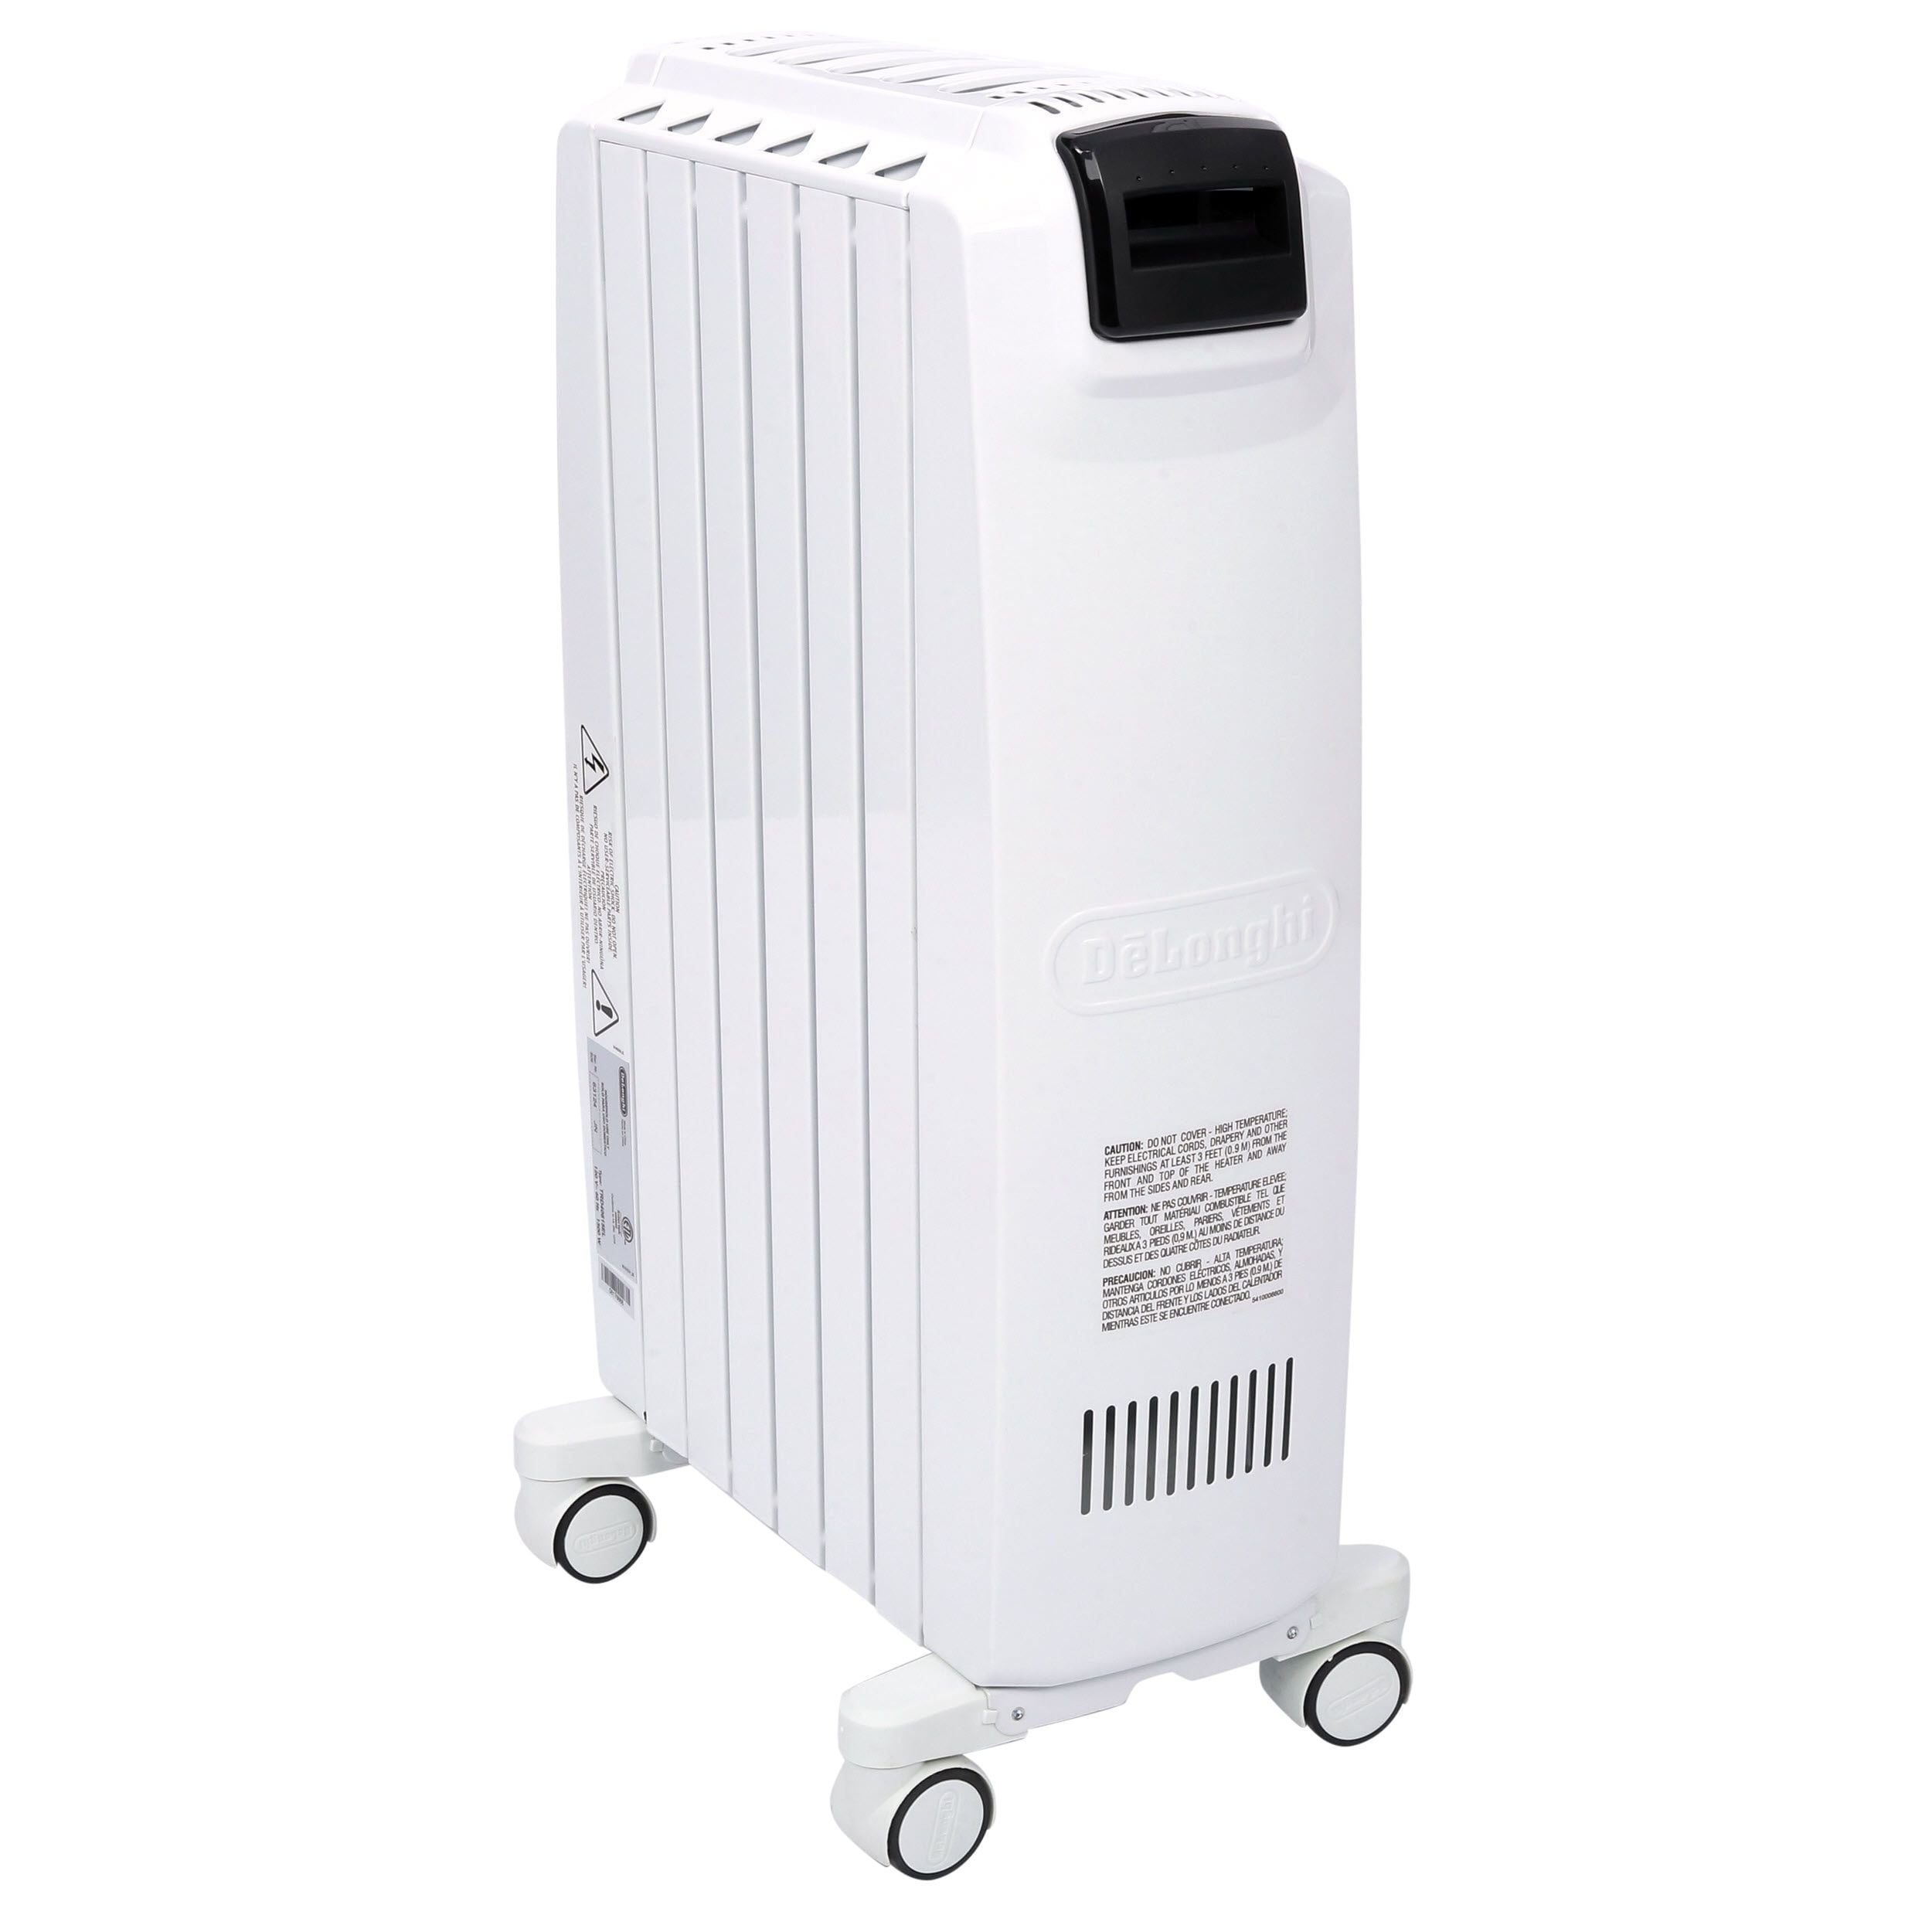 DeLonghi 1500-Watt Oil-filled Radiant Tower Indoor Electric Heater with Thermostat in the Electric Space Heaters department at Lowes.com